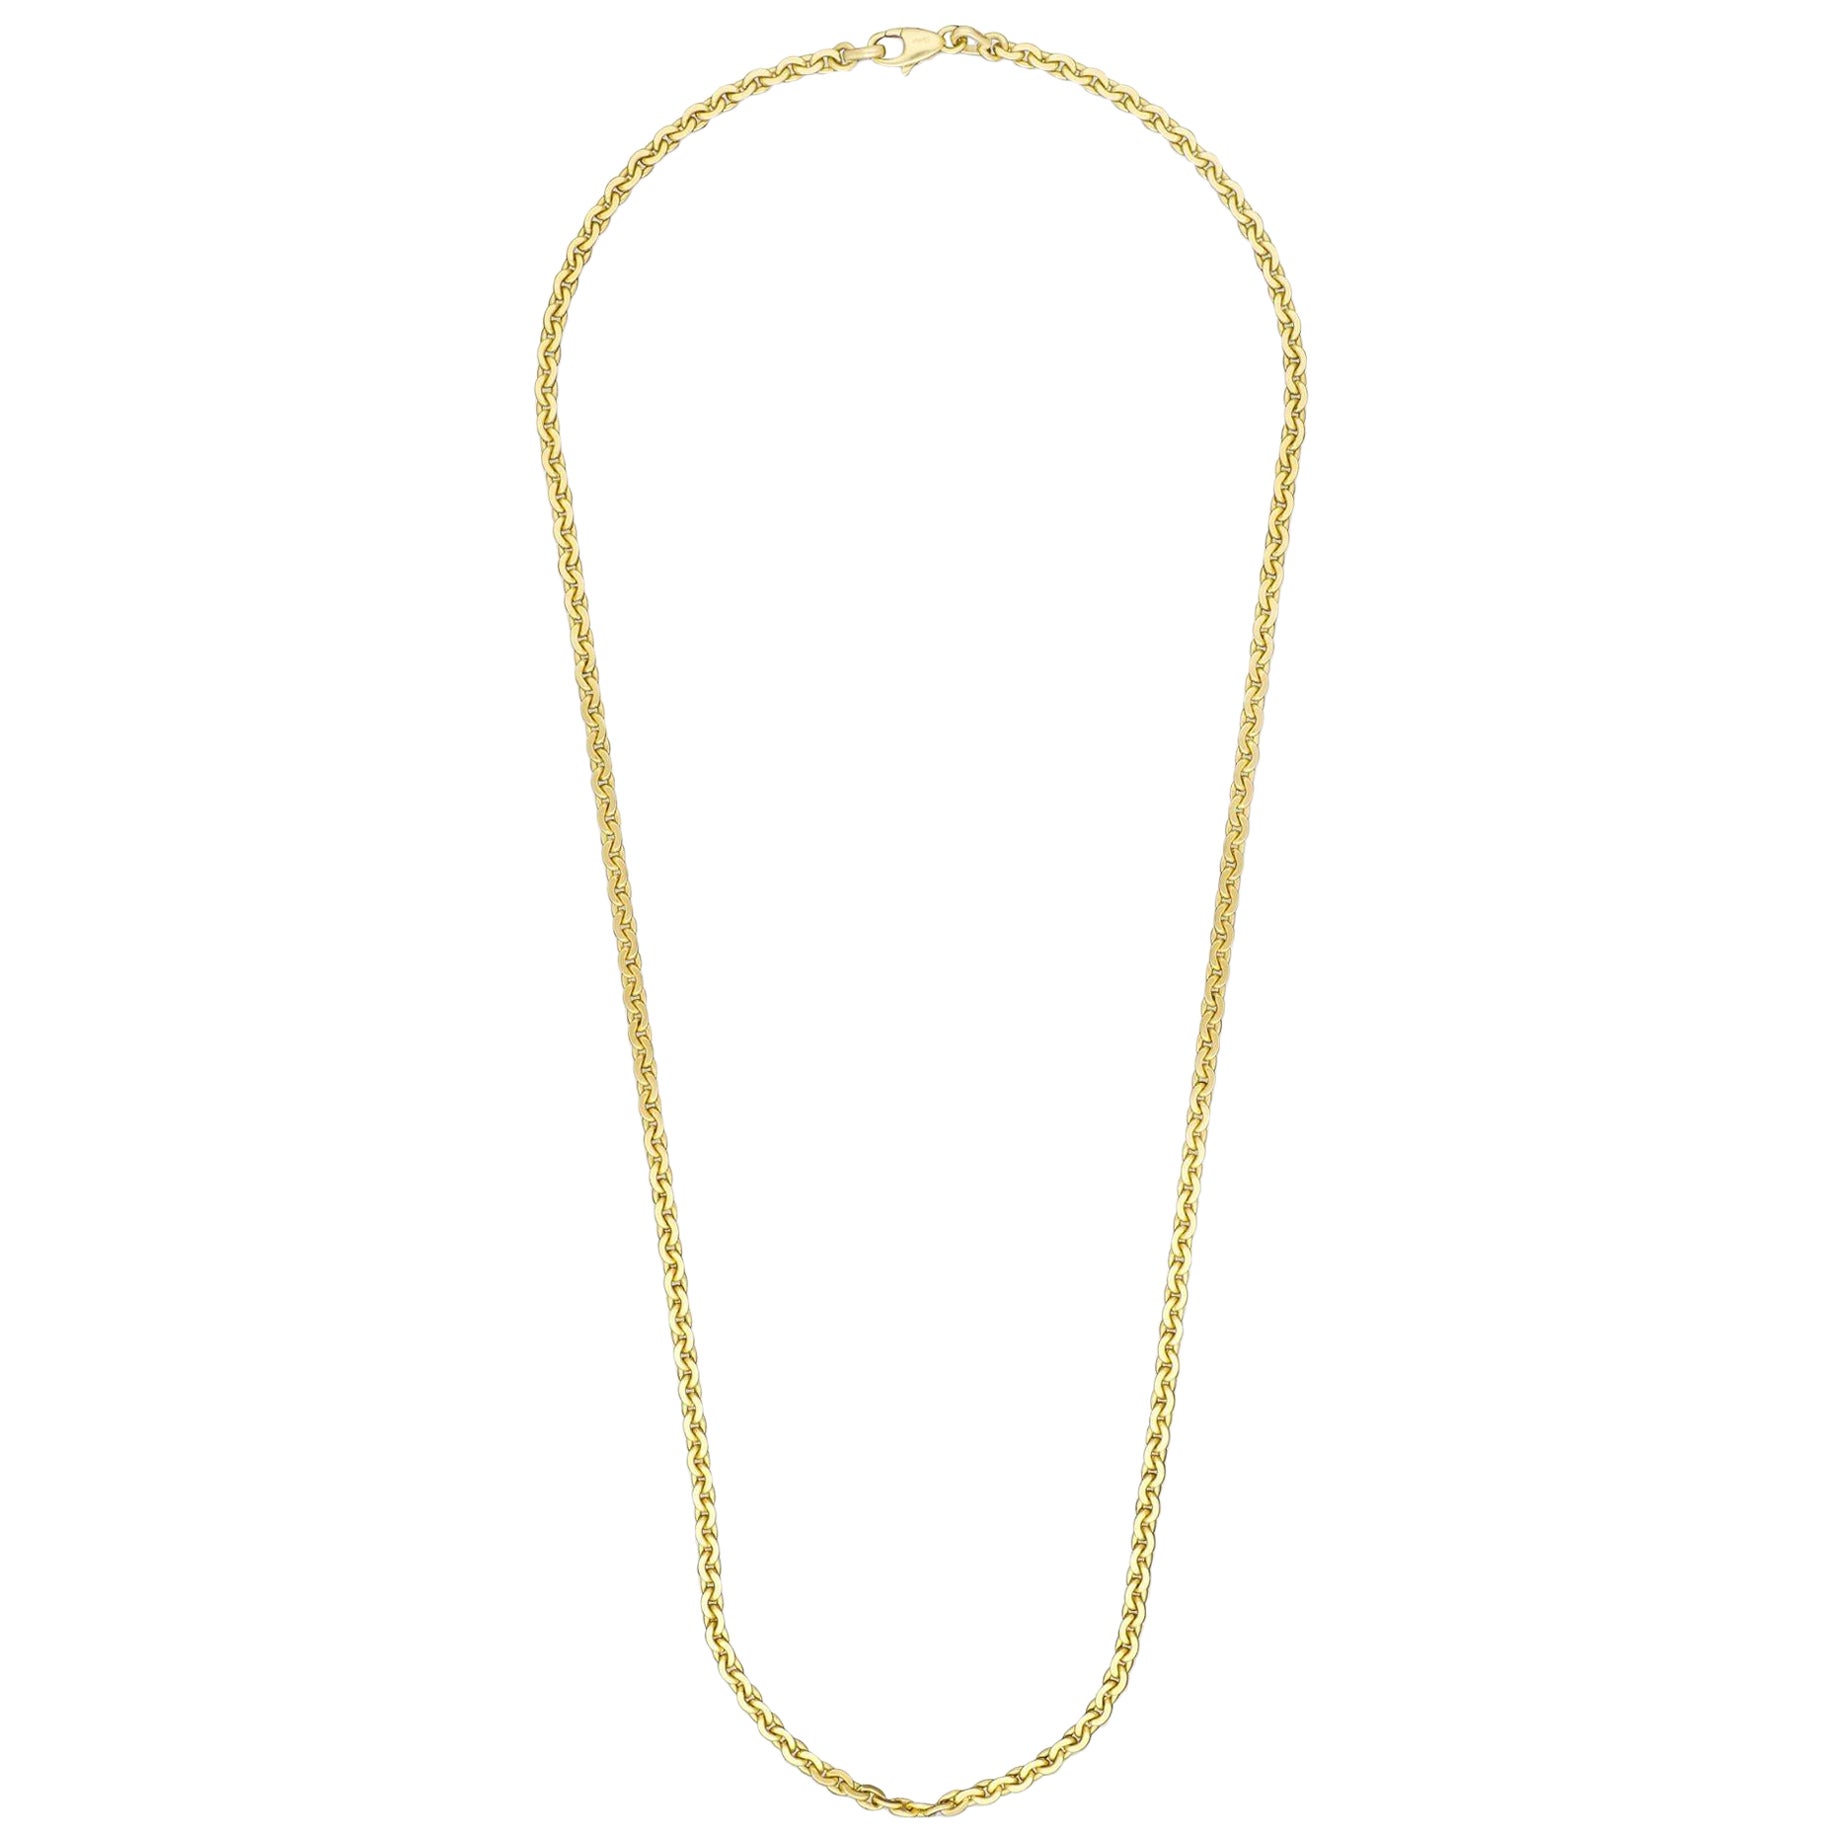 Cartier 18ct Gold Flattened Oval Link Long Chain Circa 1980s